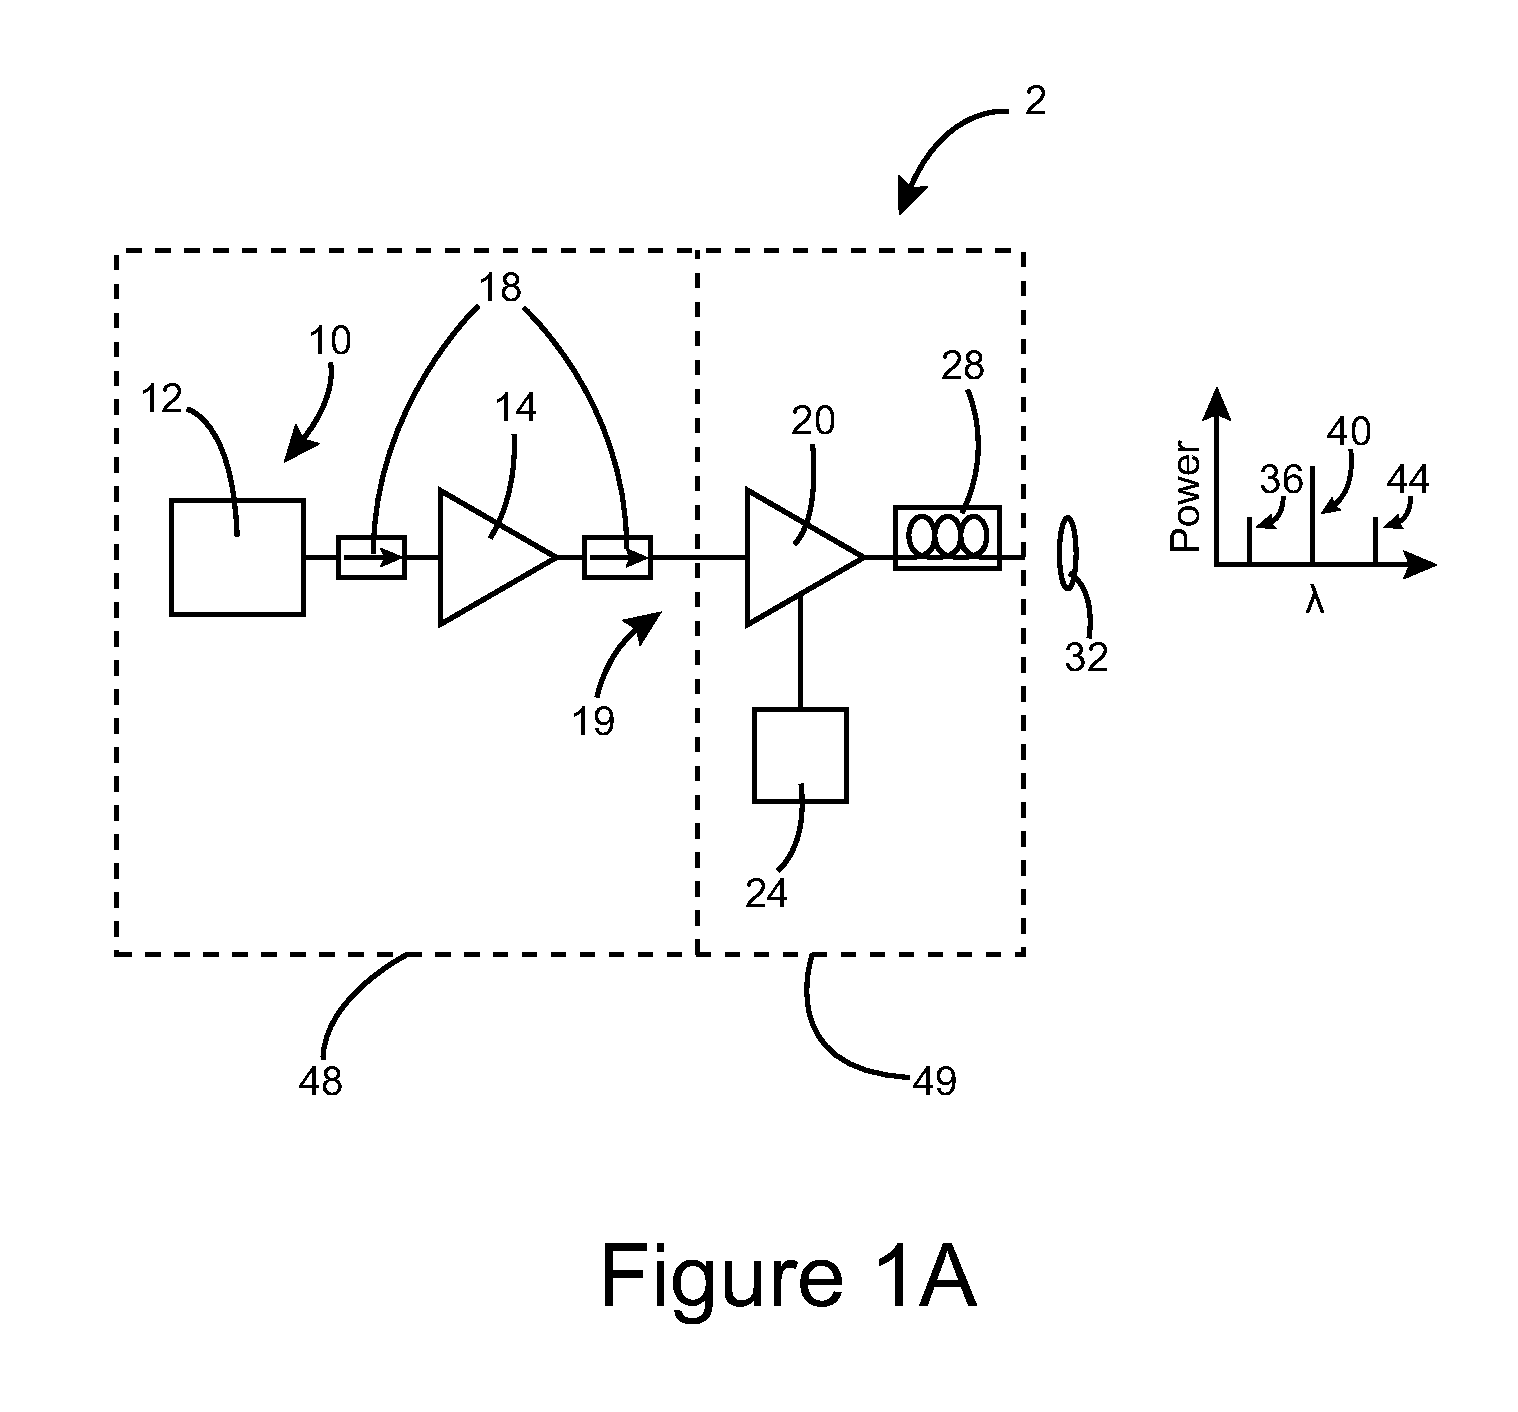 Laser or Amplifier Optical Device Pumped or Seeded with Nonlinearly Generated Light